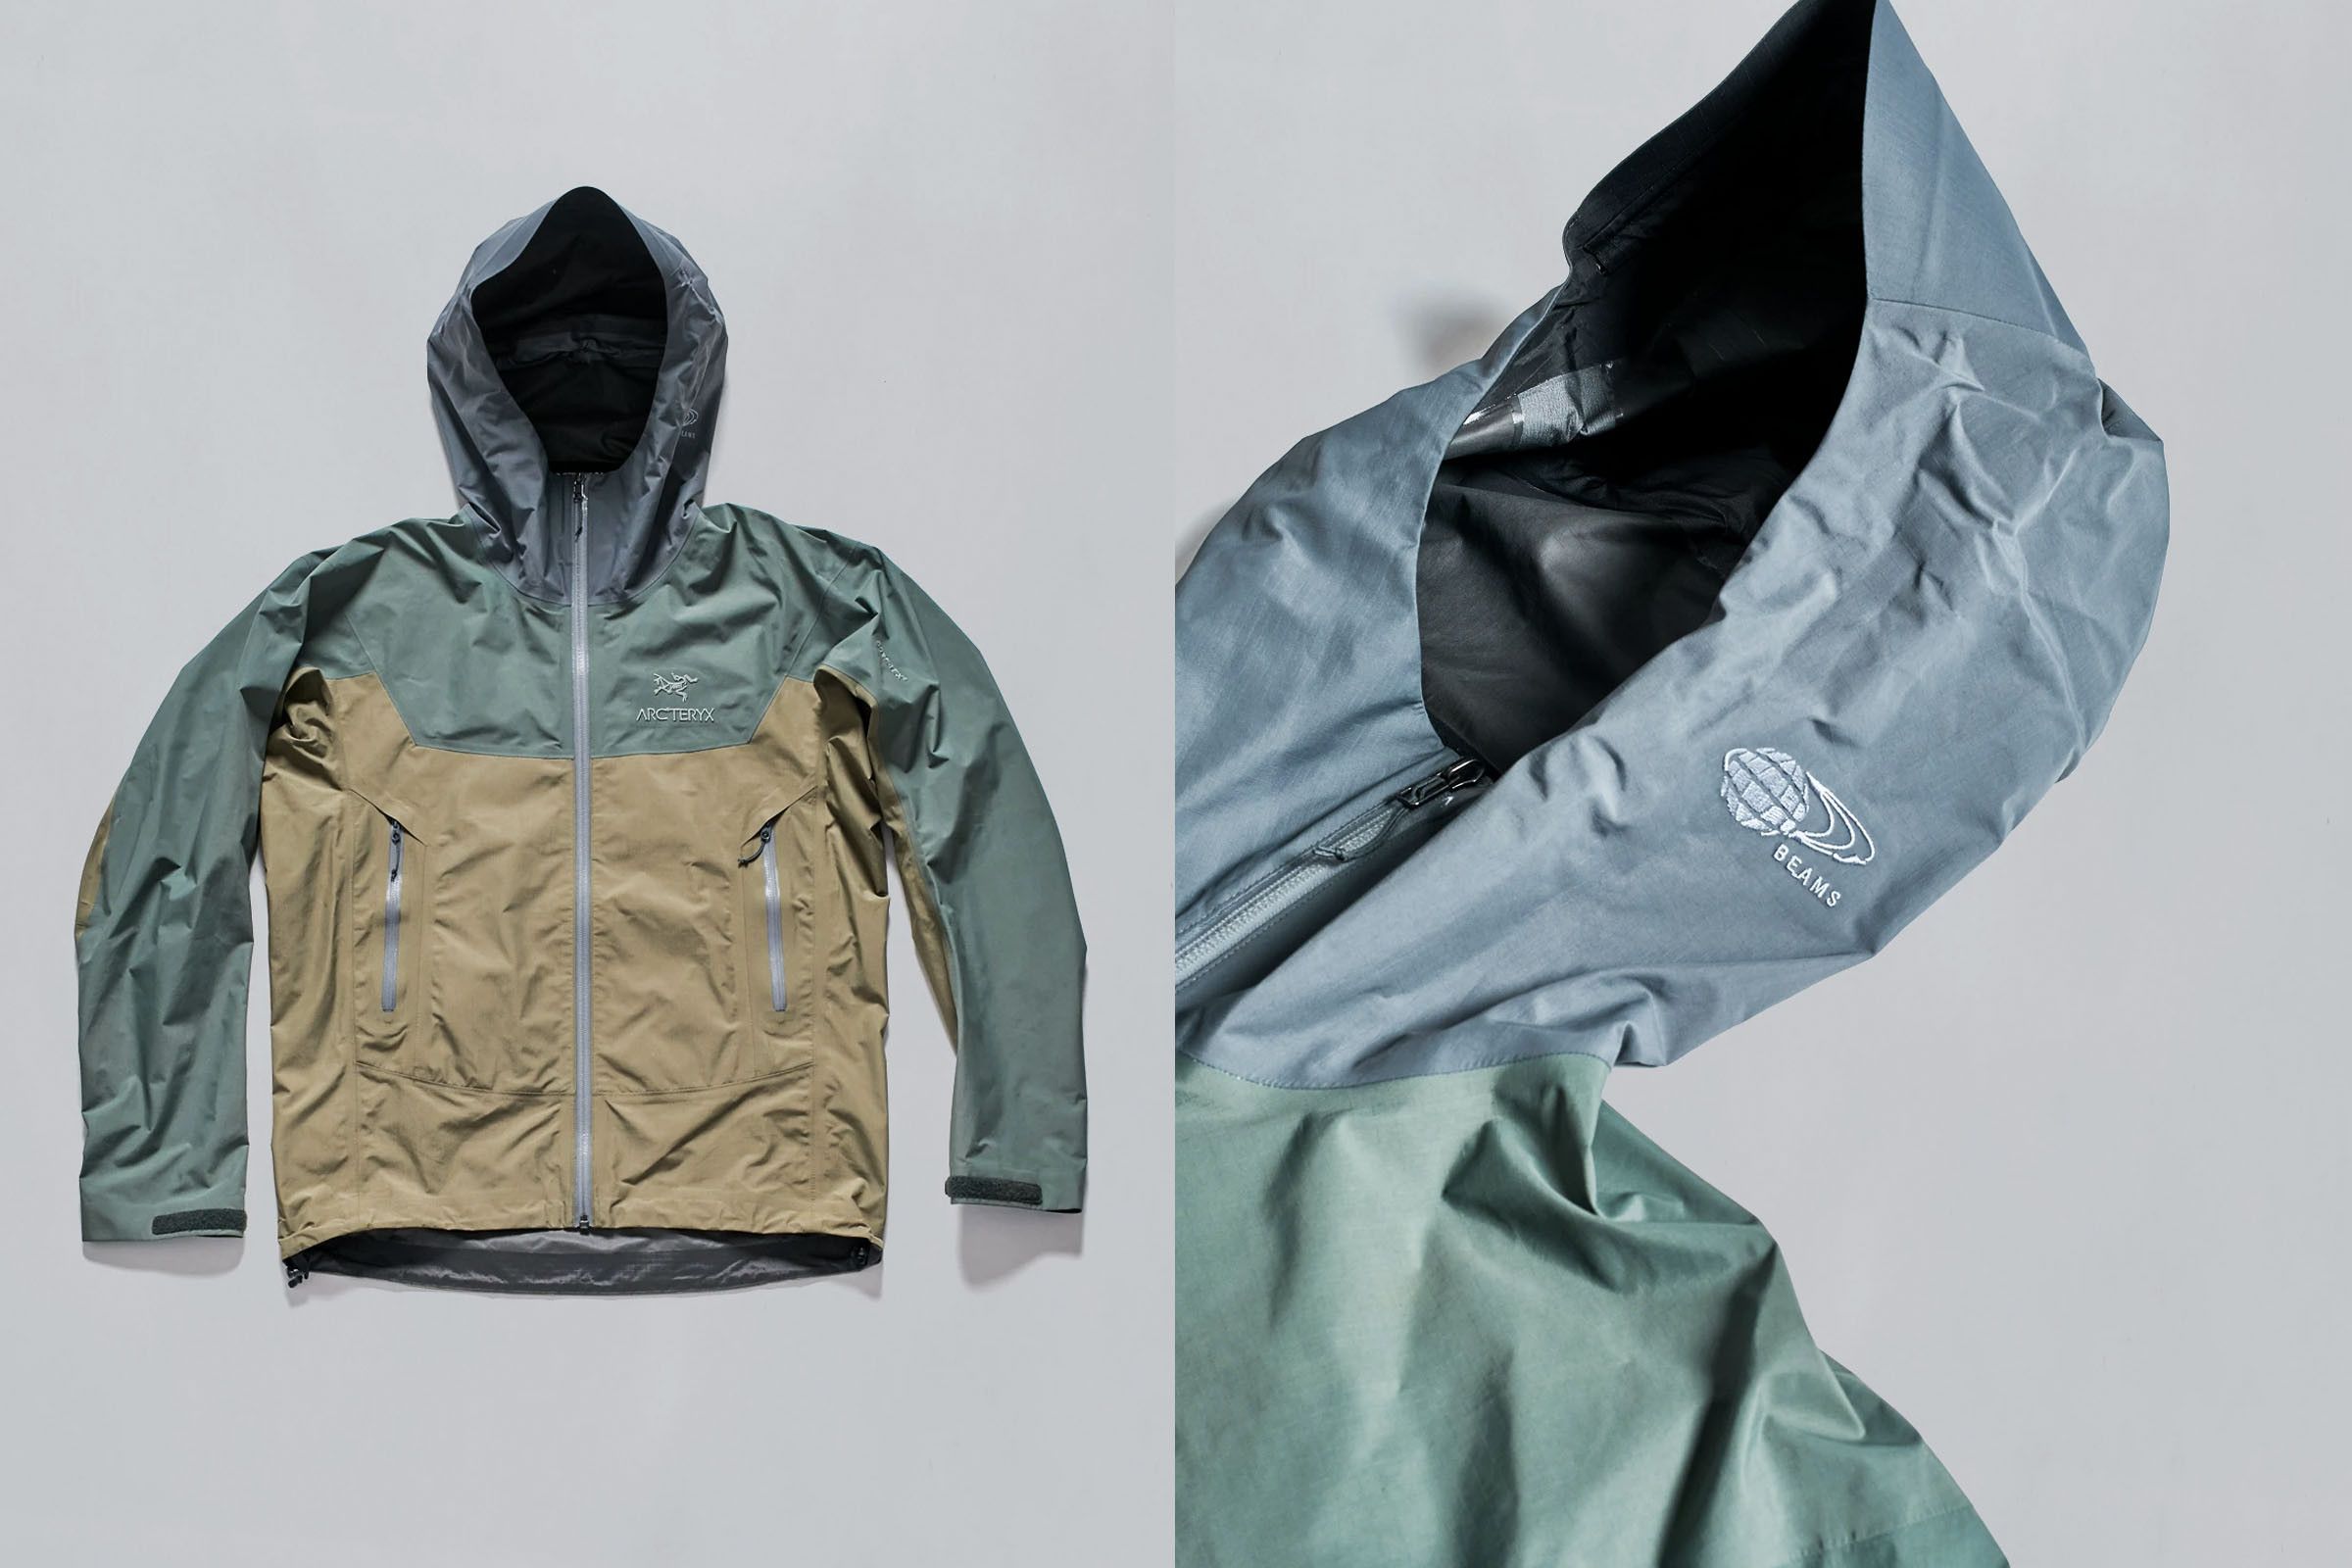 When Sportswear Brands Make Outdoor-Ready Gear, Where Does That Leave the OG Outfitters?